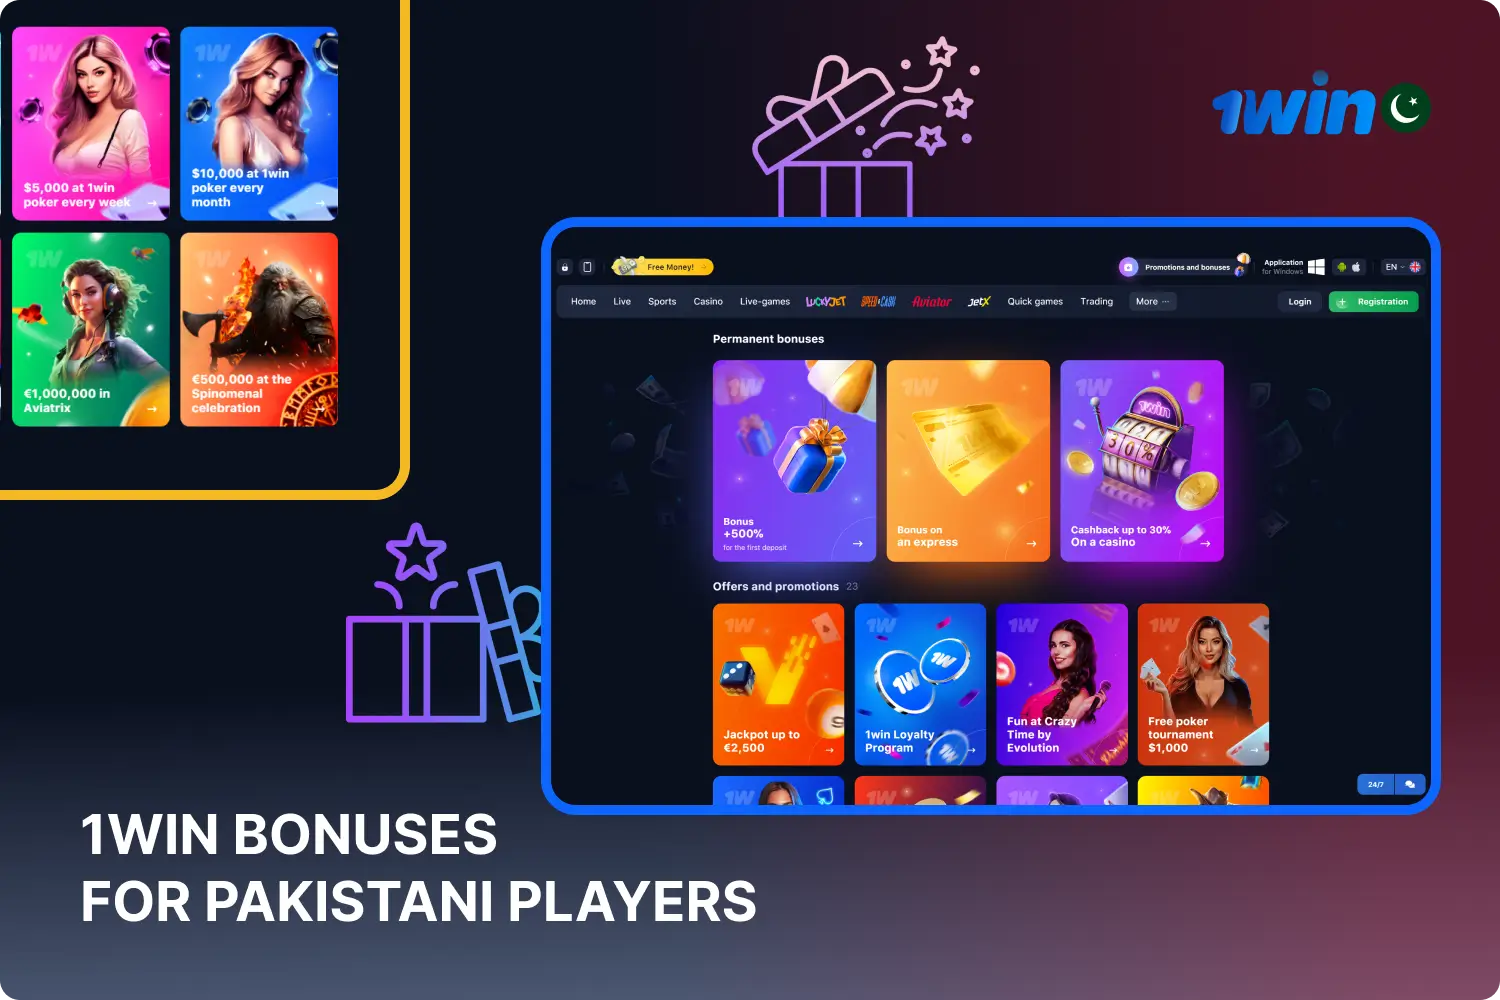 Pakistani players can take benefit of 1win's many promotional offers and get nice bonuses for casino games and sports betting